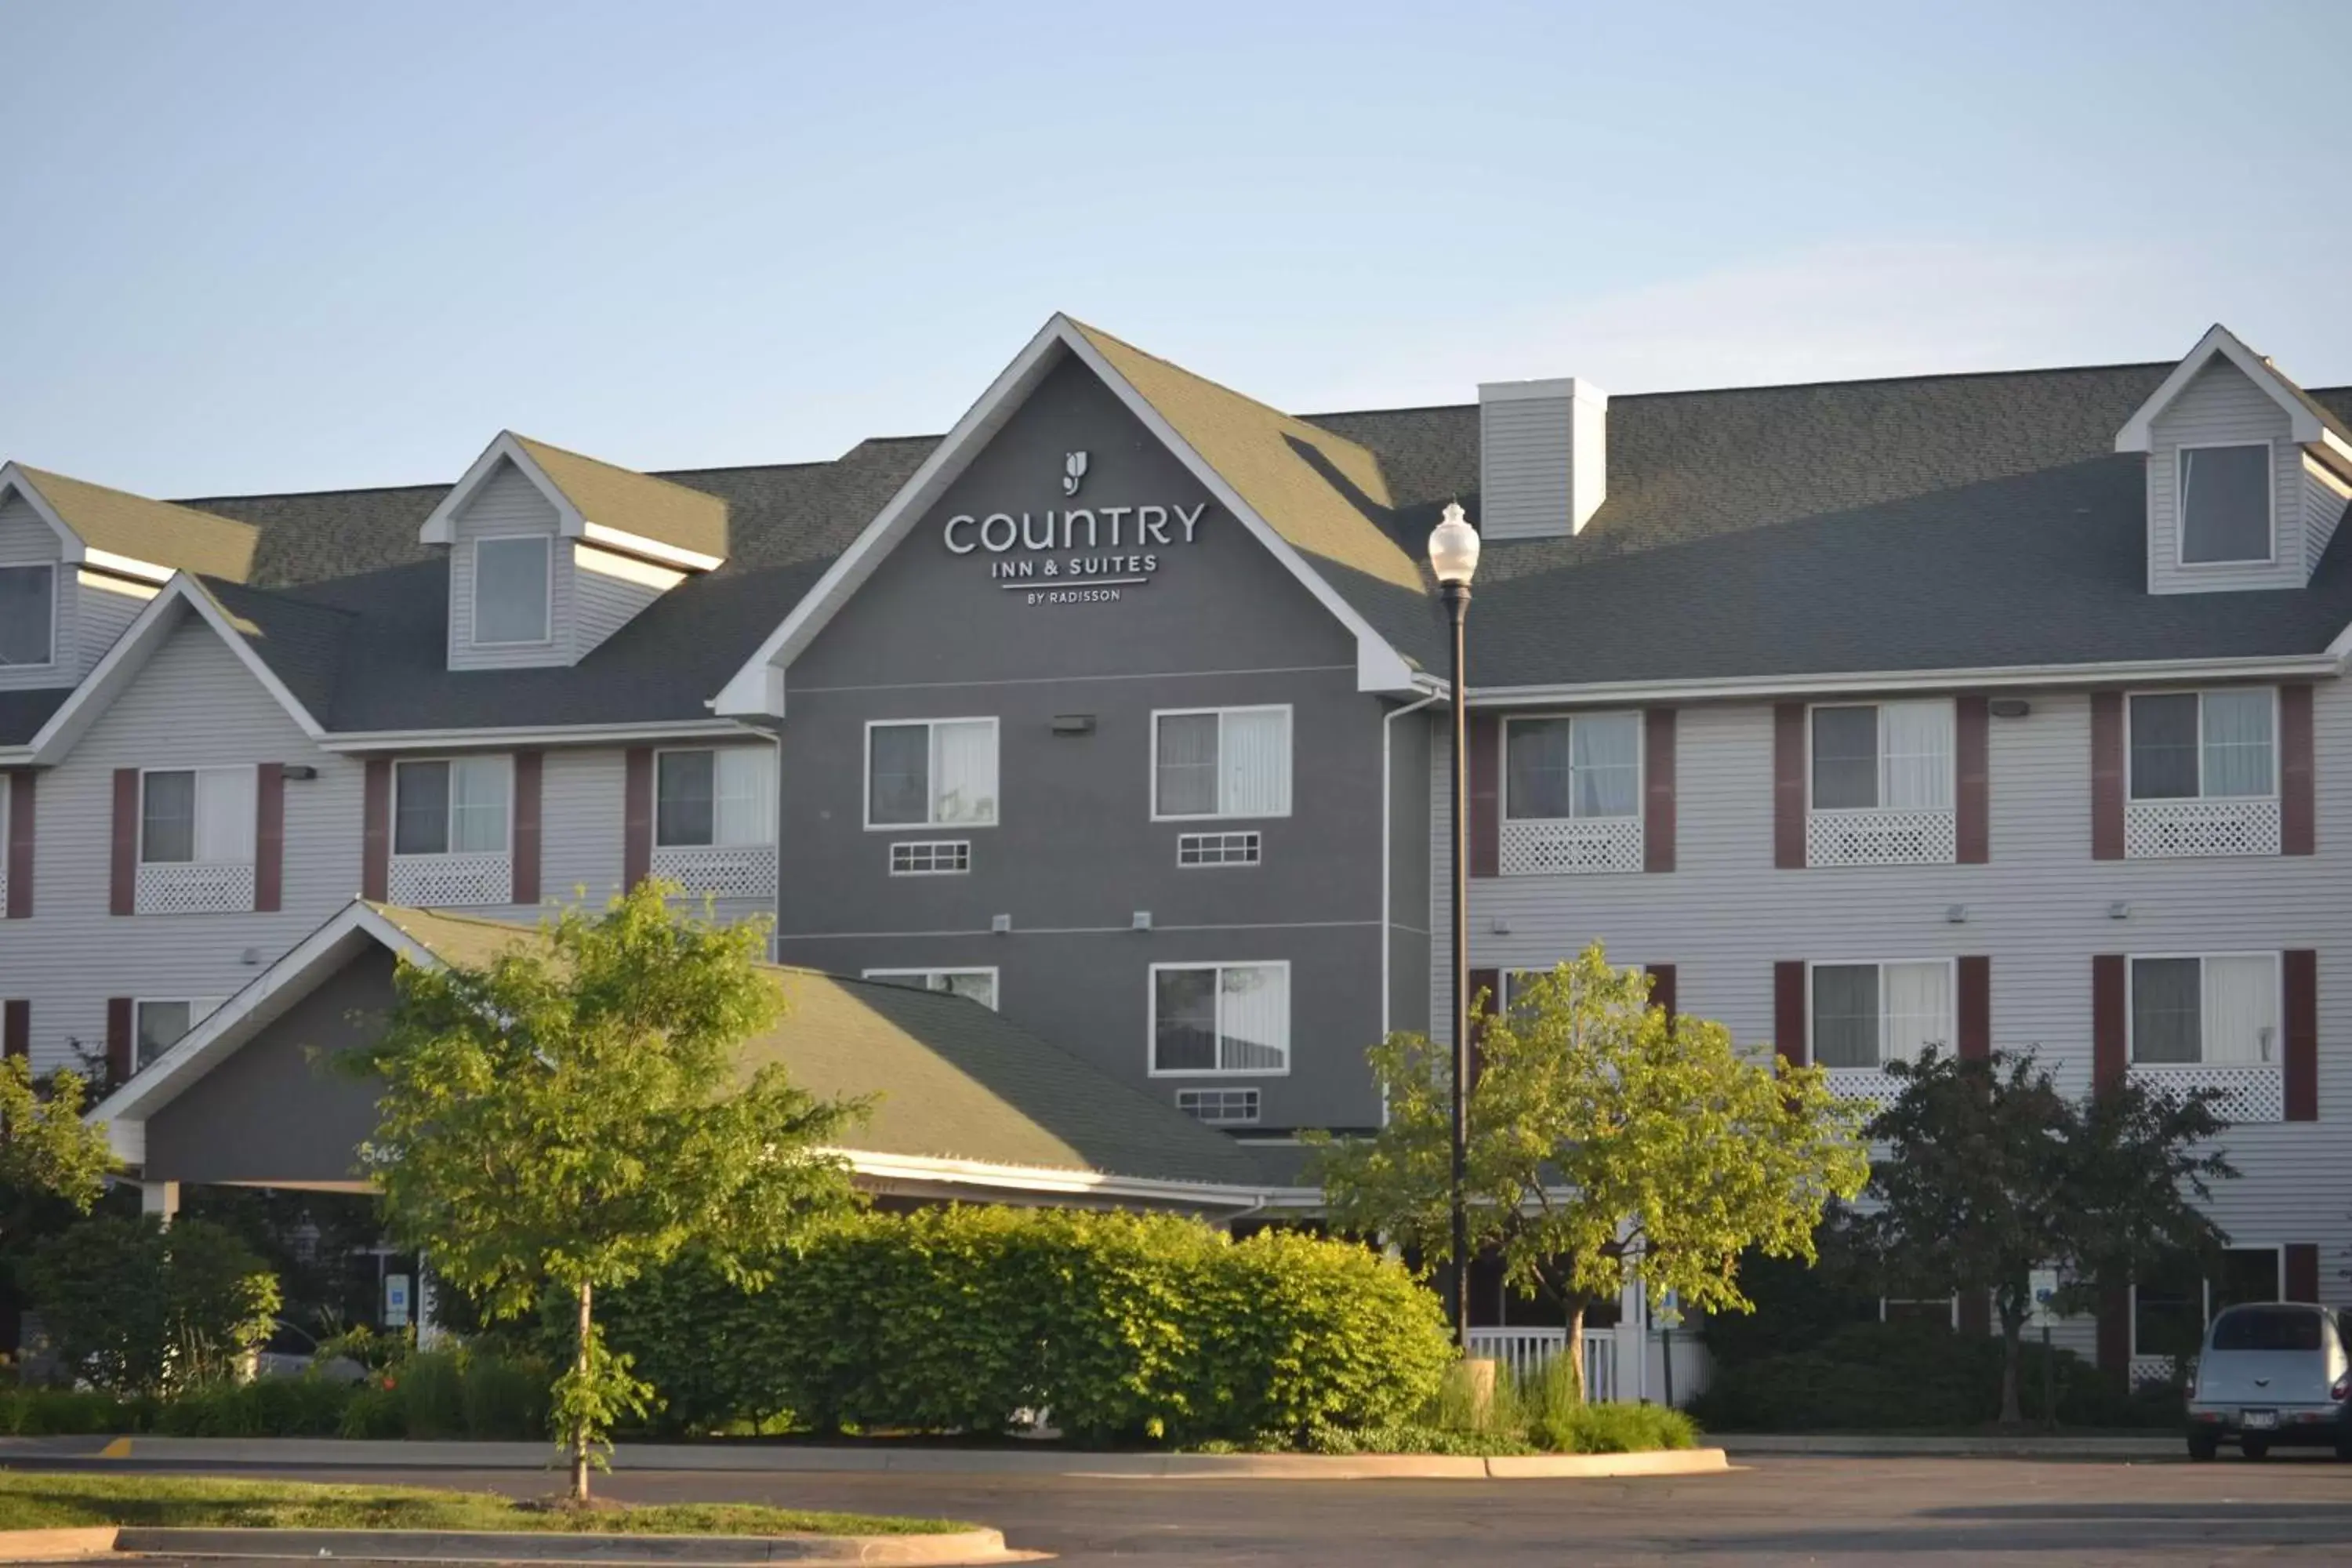 Property building in Country Inn & Suites by Radisson, Gurnee, IL